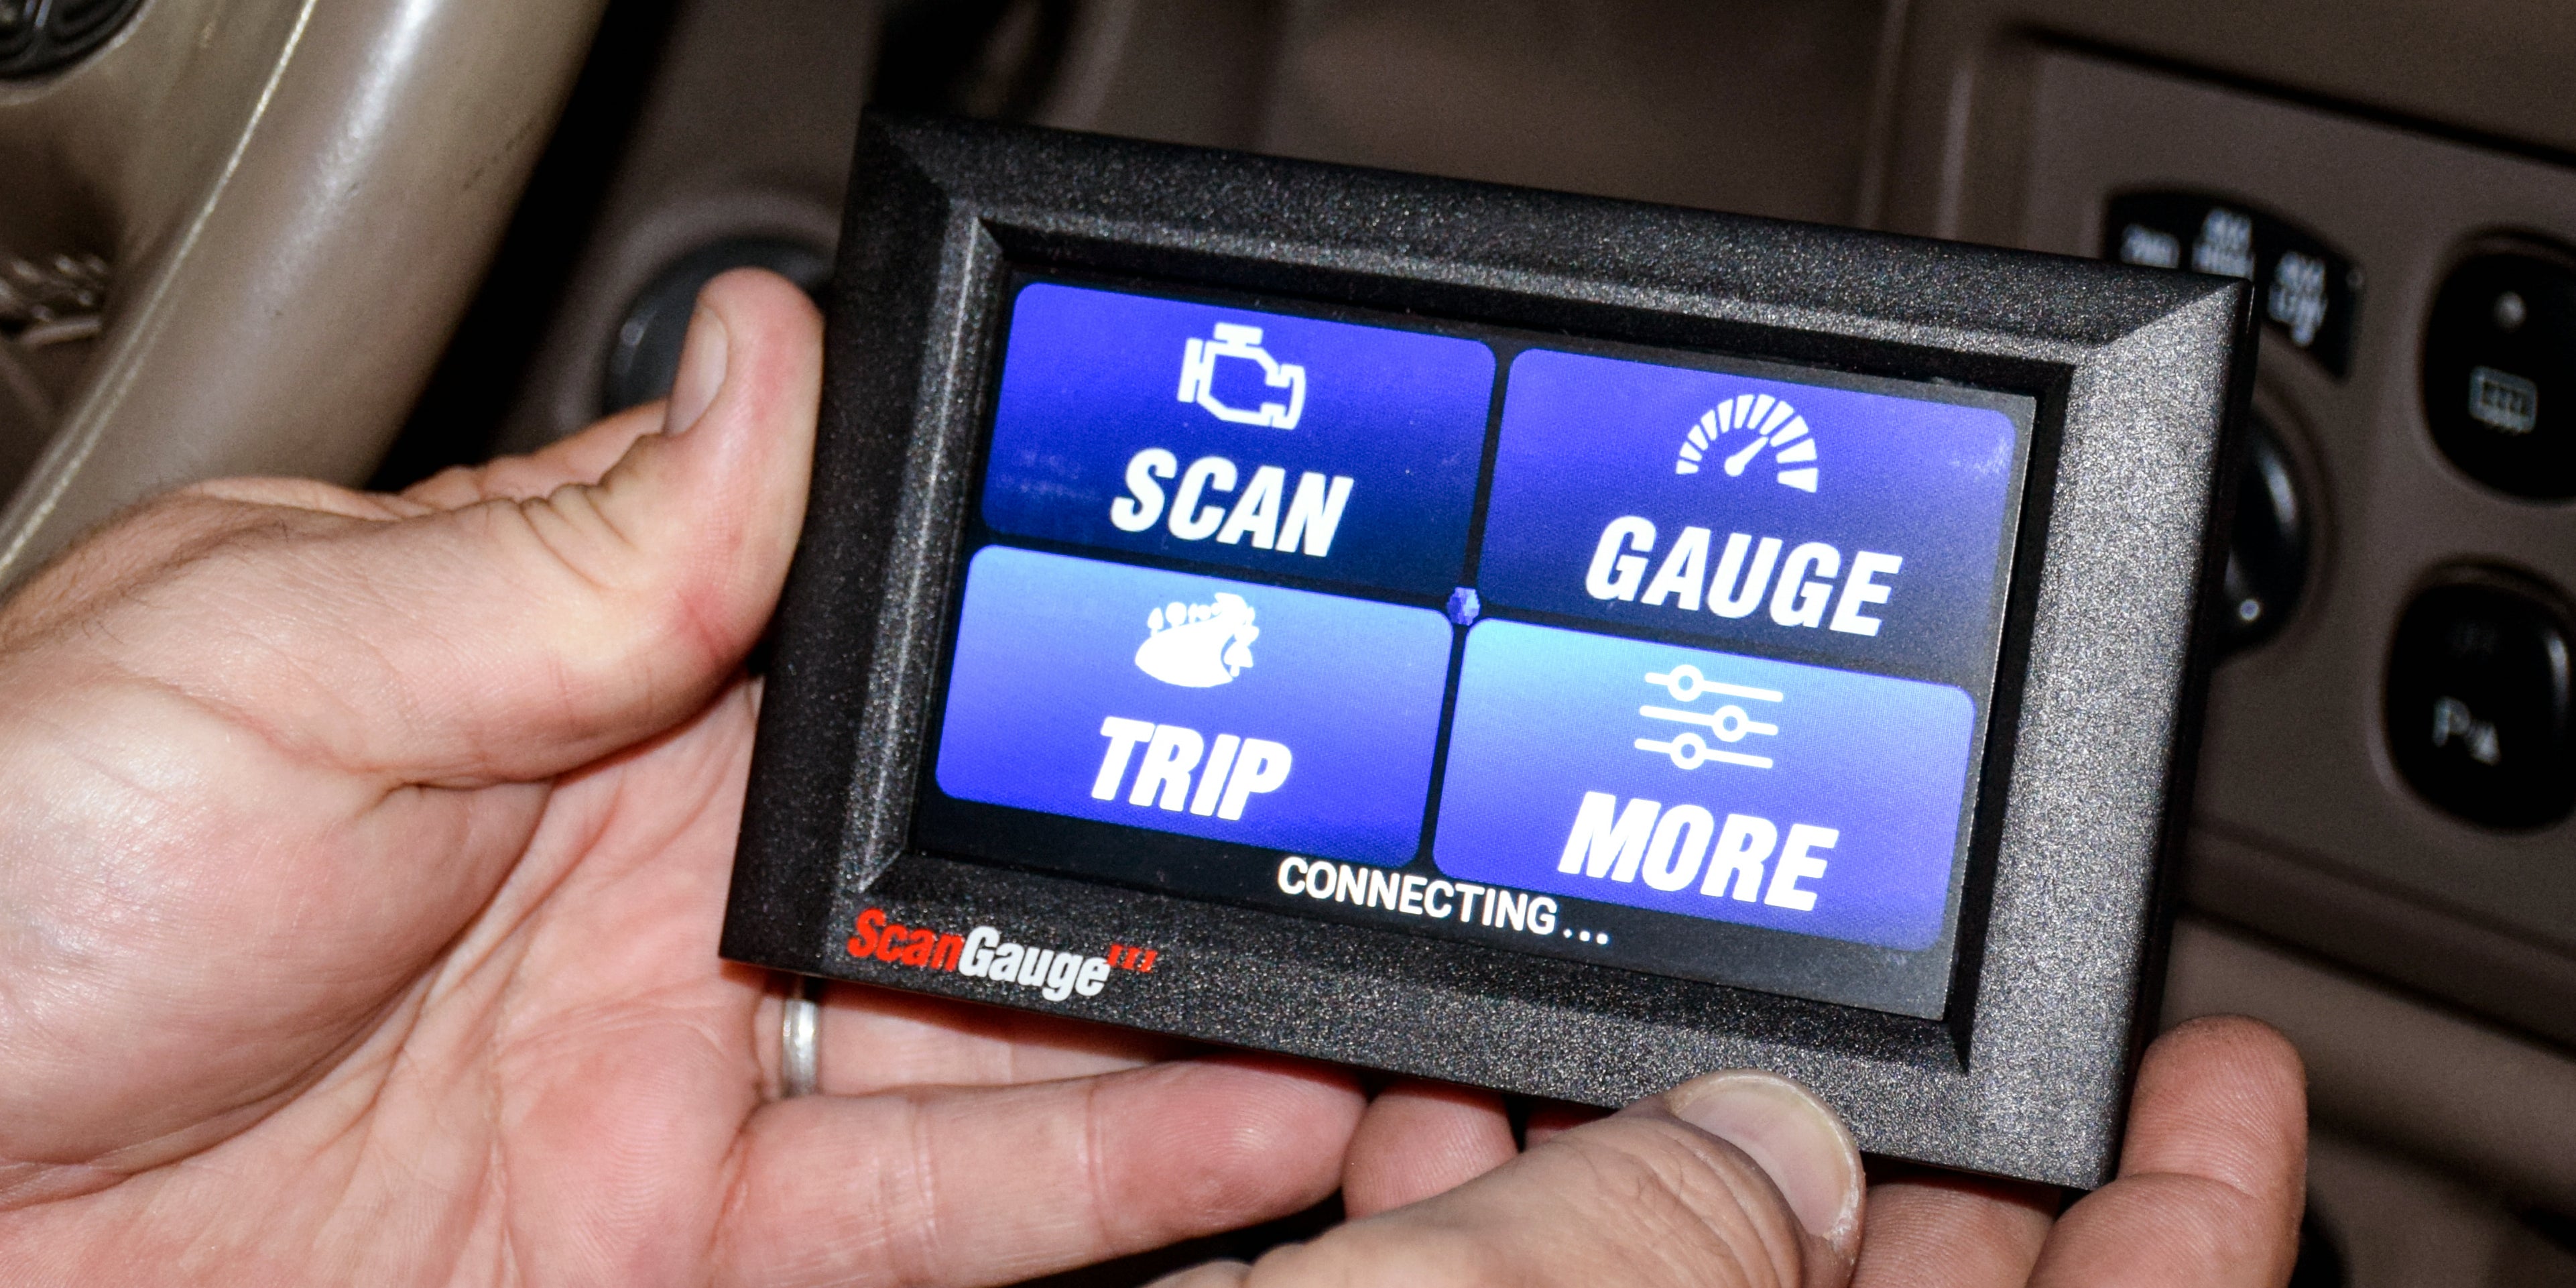 ScanGaugeIII can help you monitor your vehicle’s most vital systems and provide real-time information.